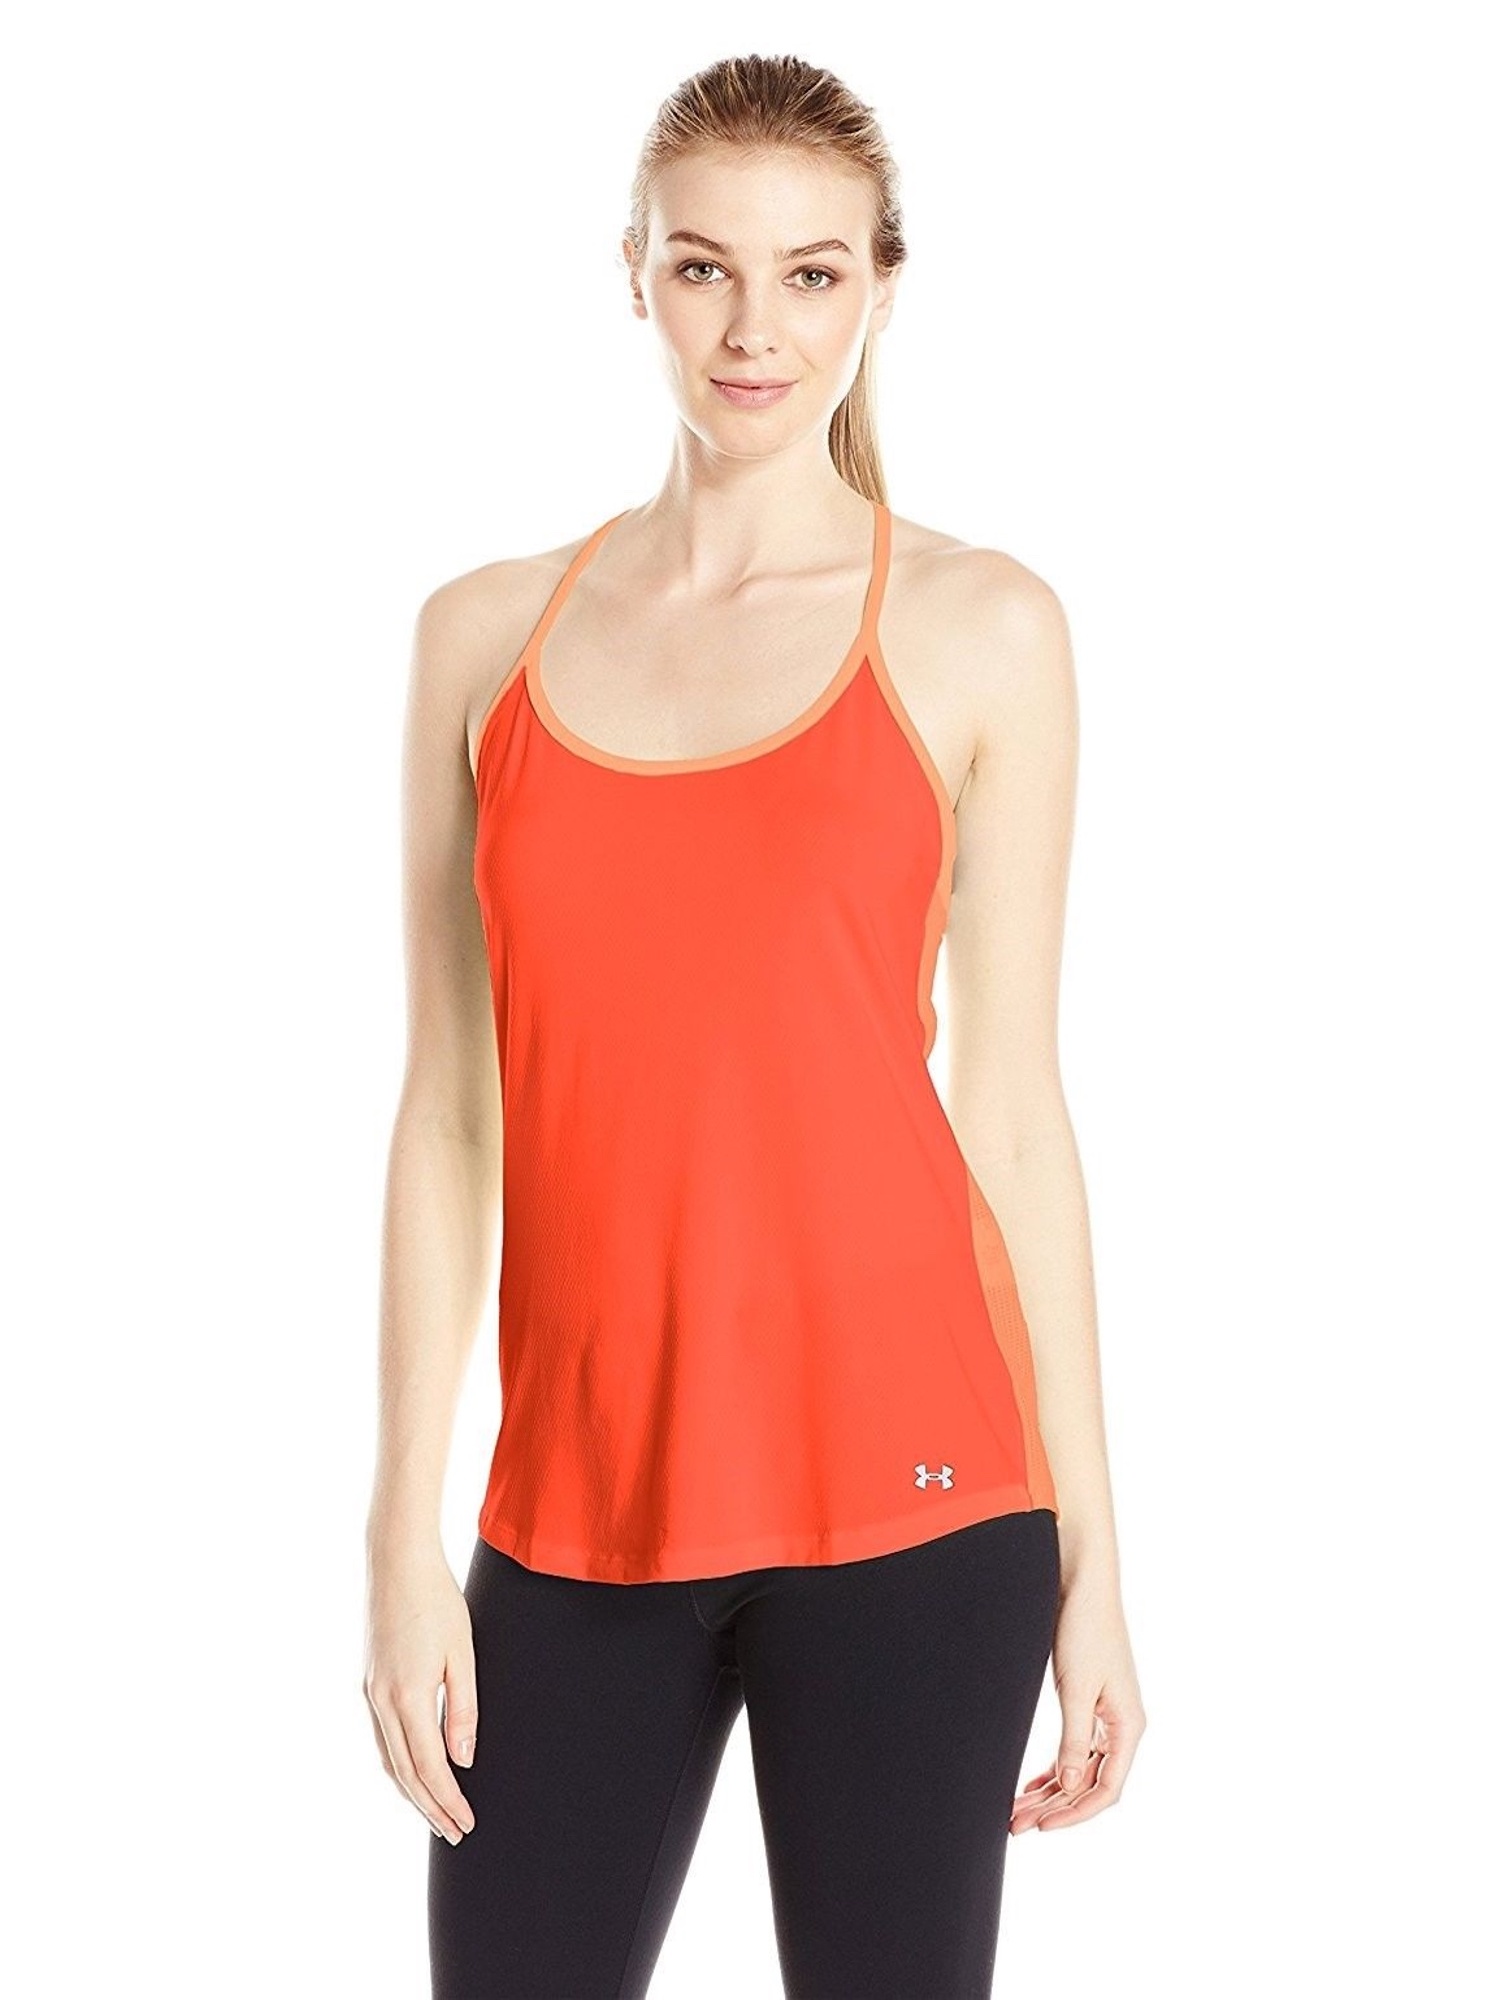 Under Armour Women's Fly By Racerback Tank Top - image 1 of 2